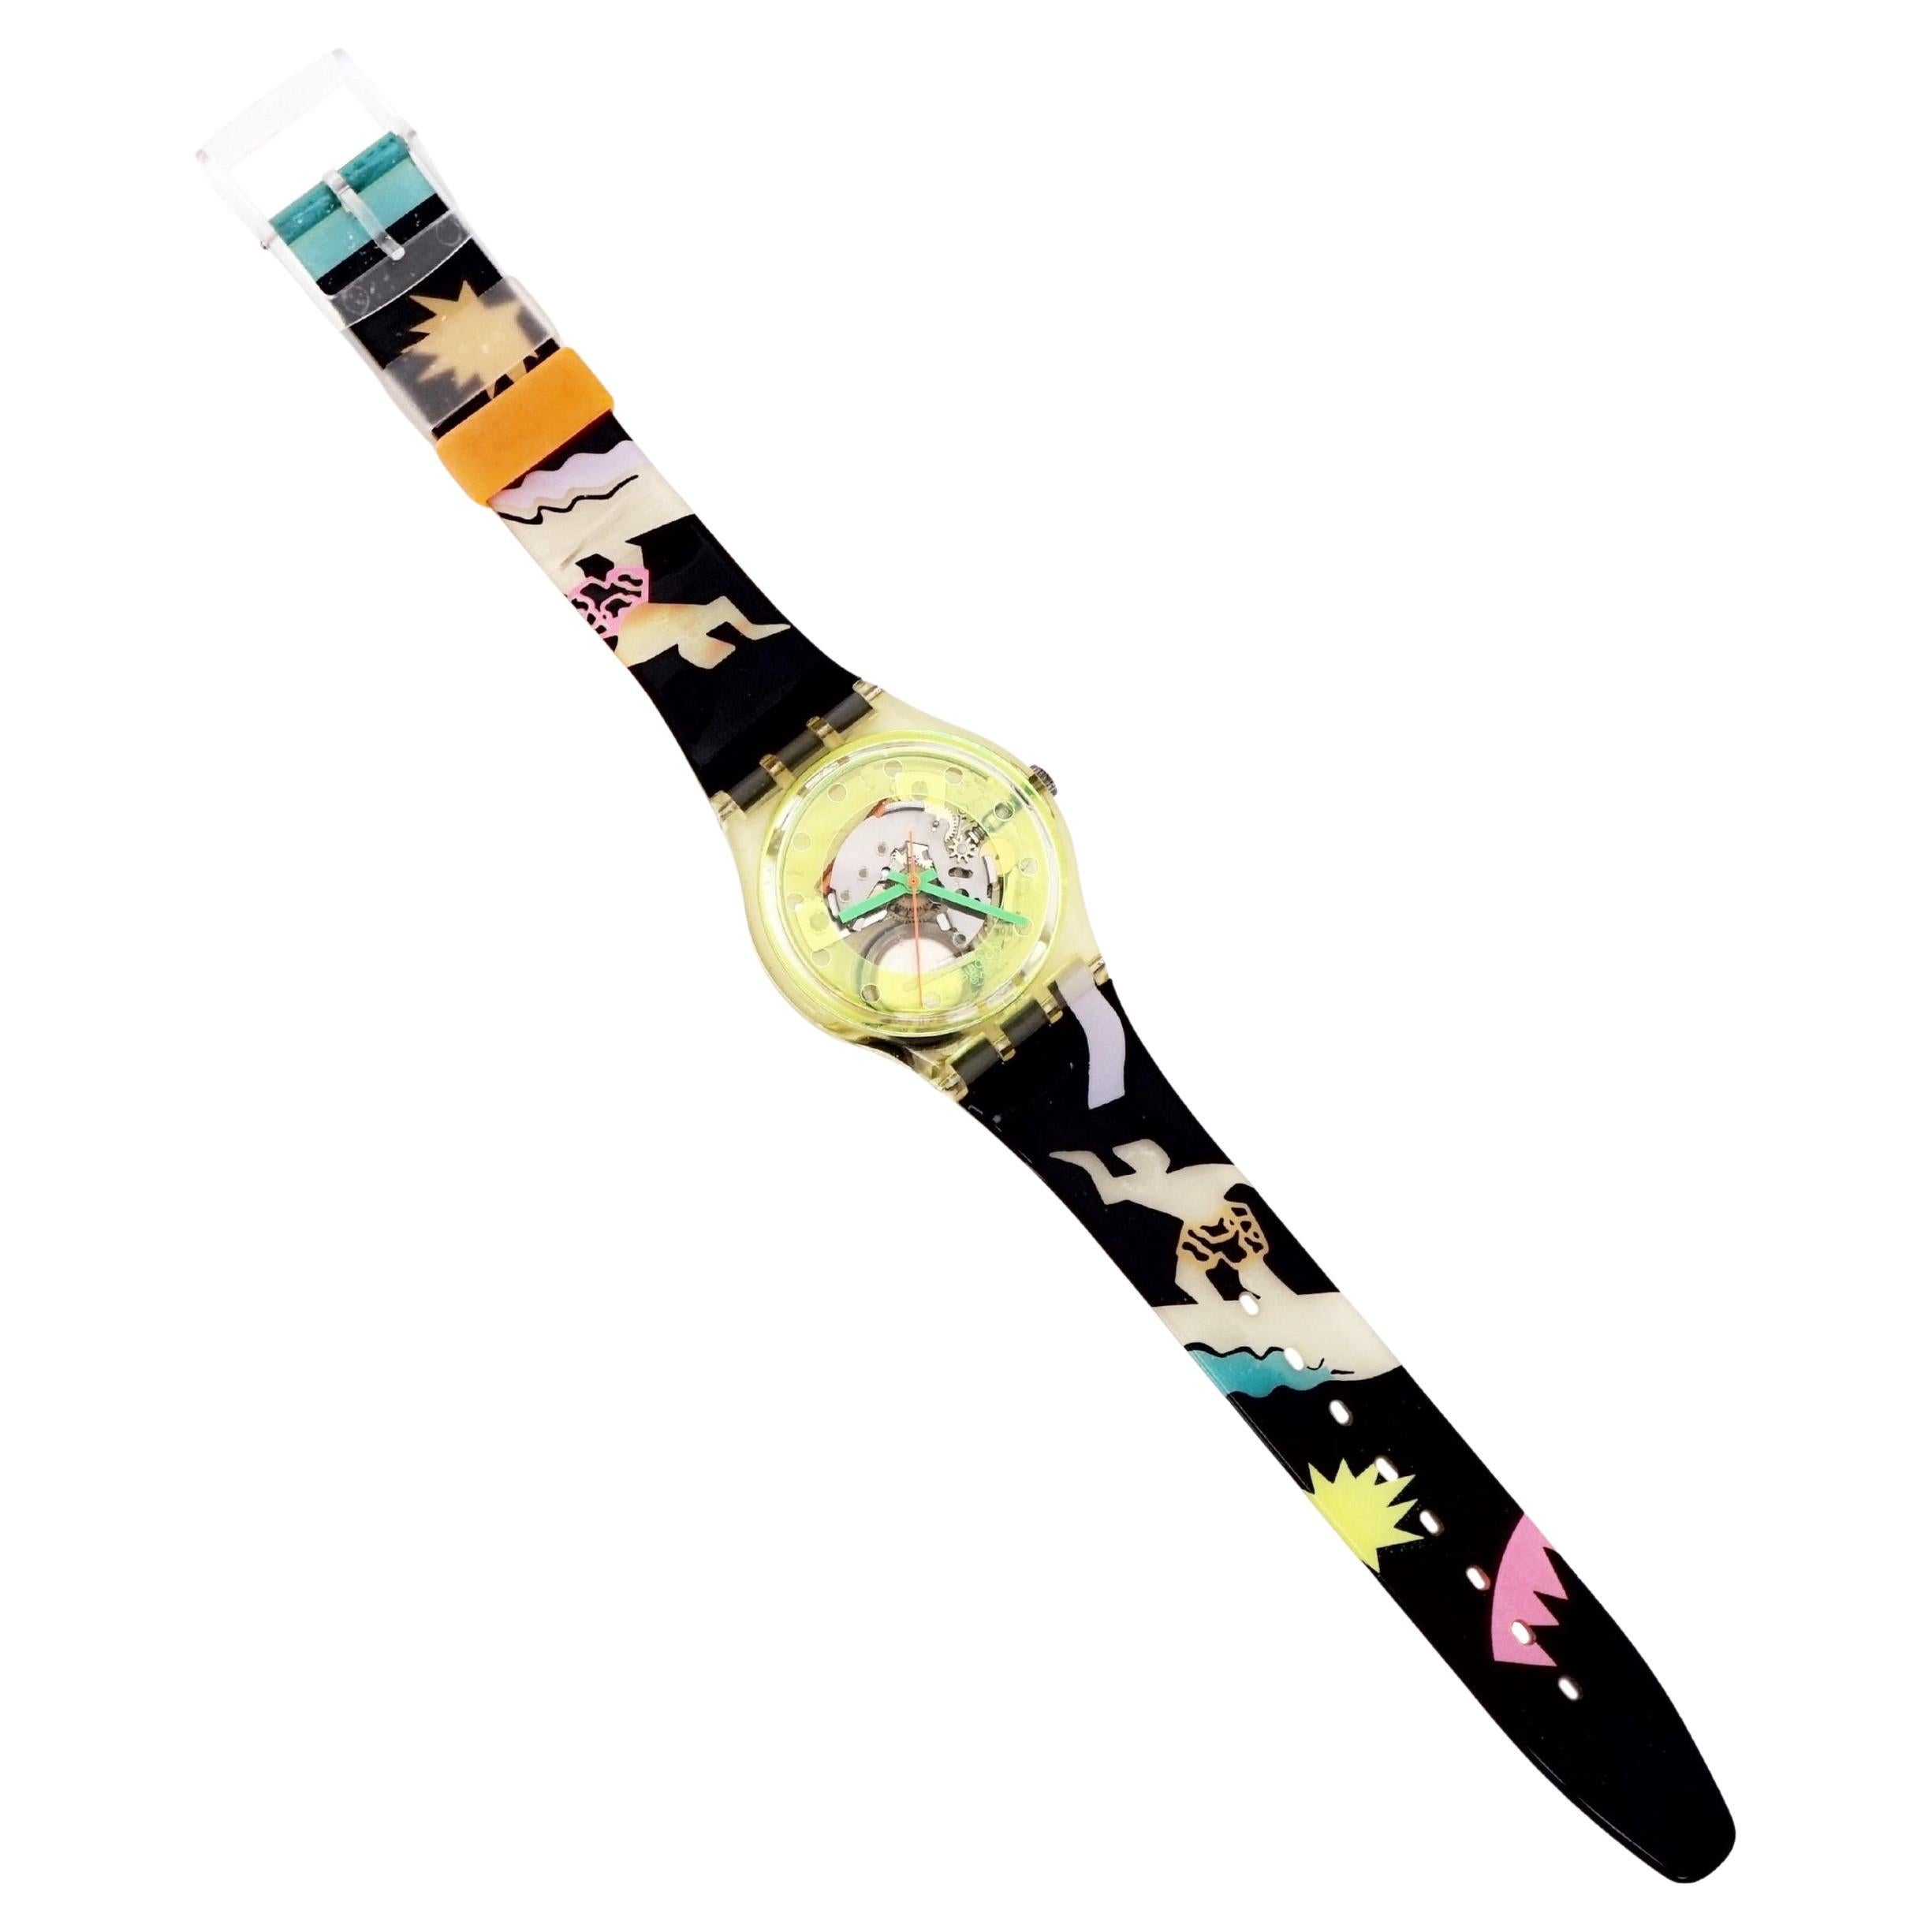 Neon Technosphere Collection "Bermudas" Wristwatch By Swatch, 1990s For Sale